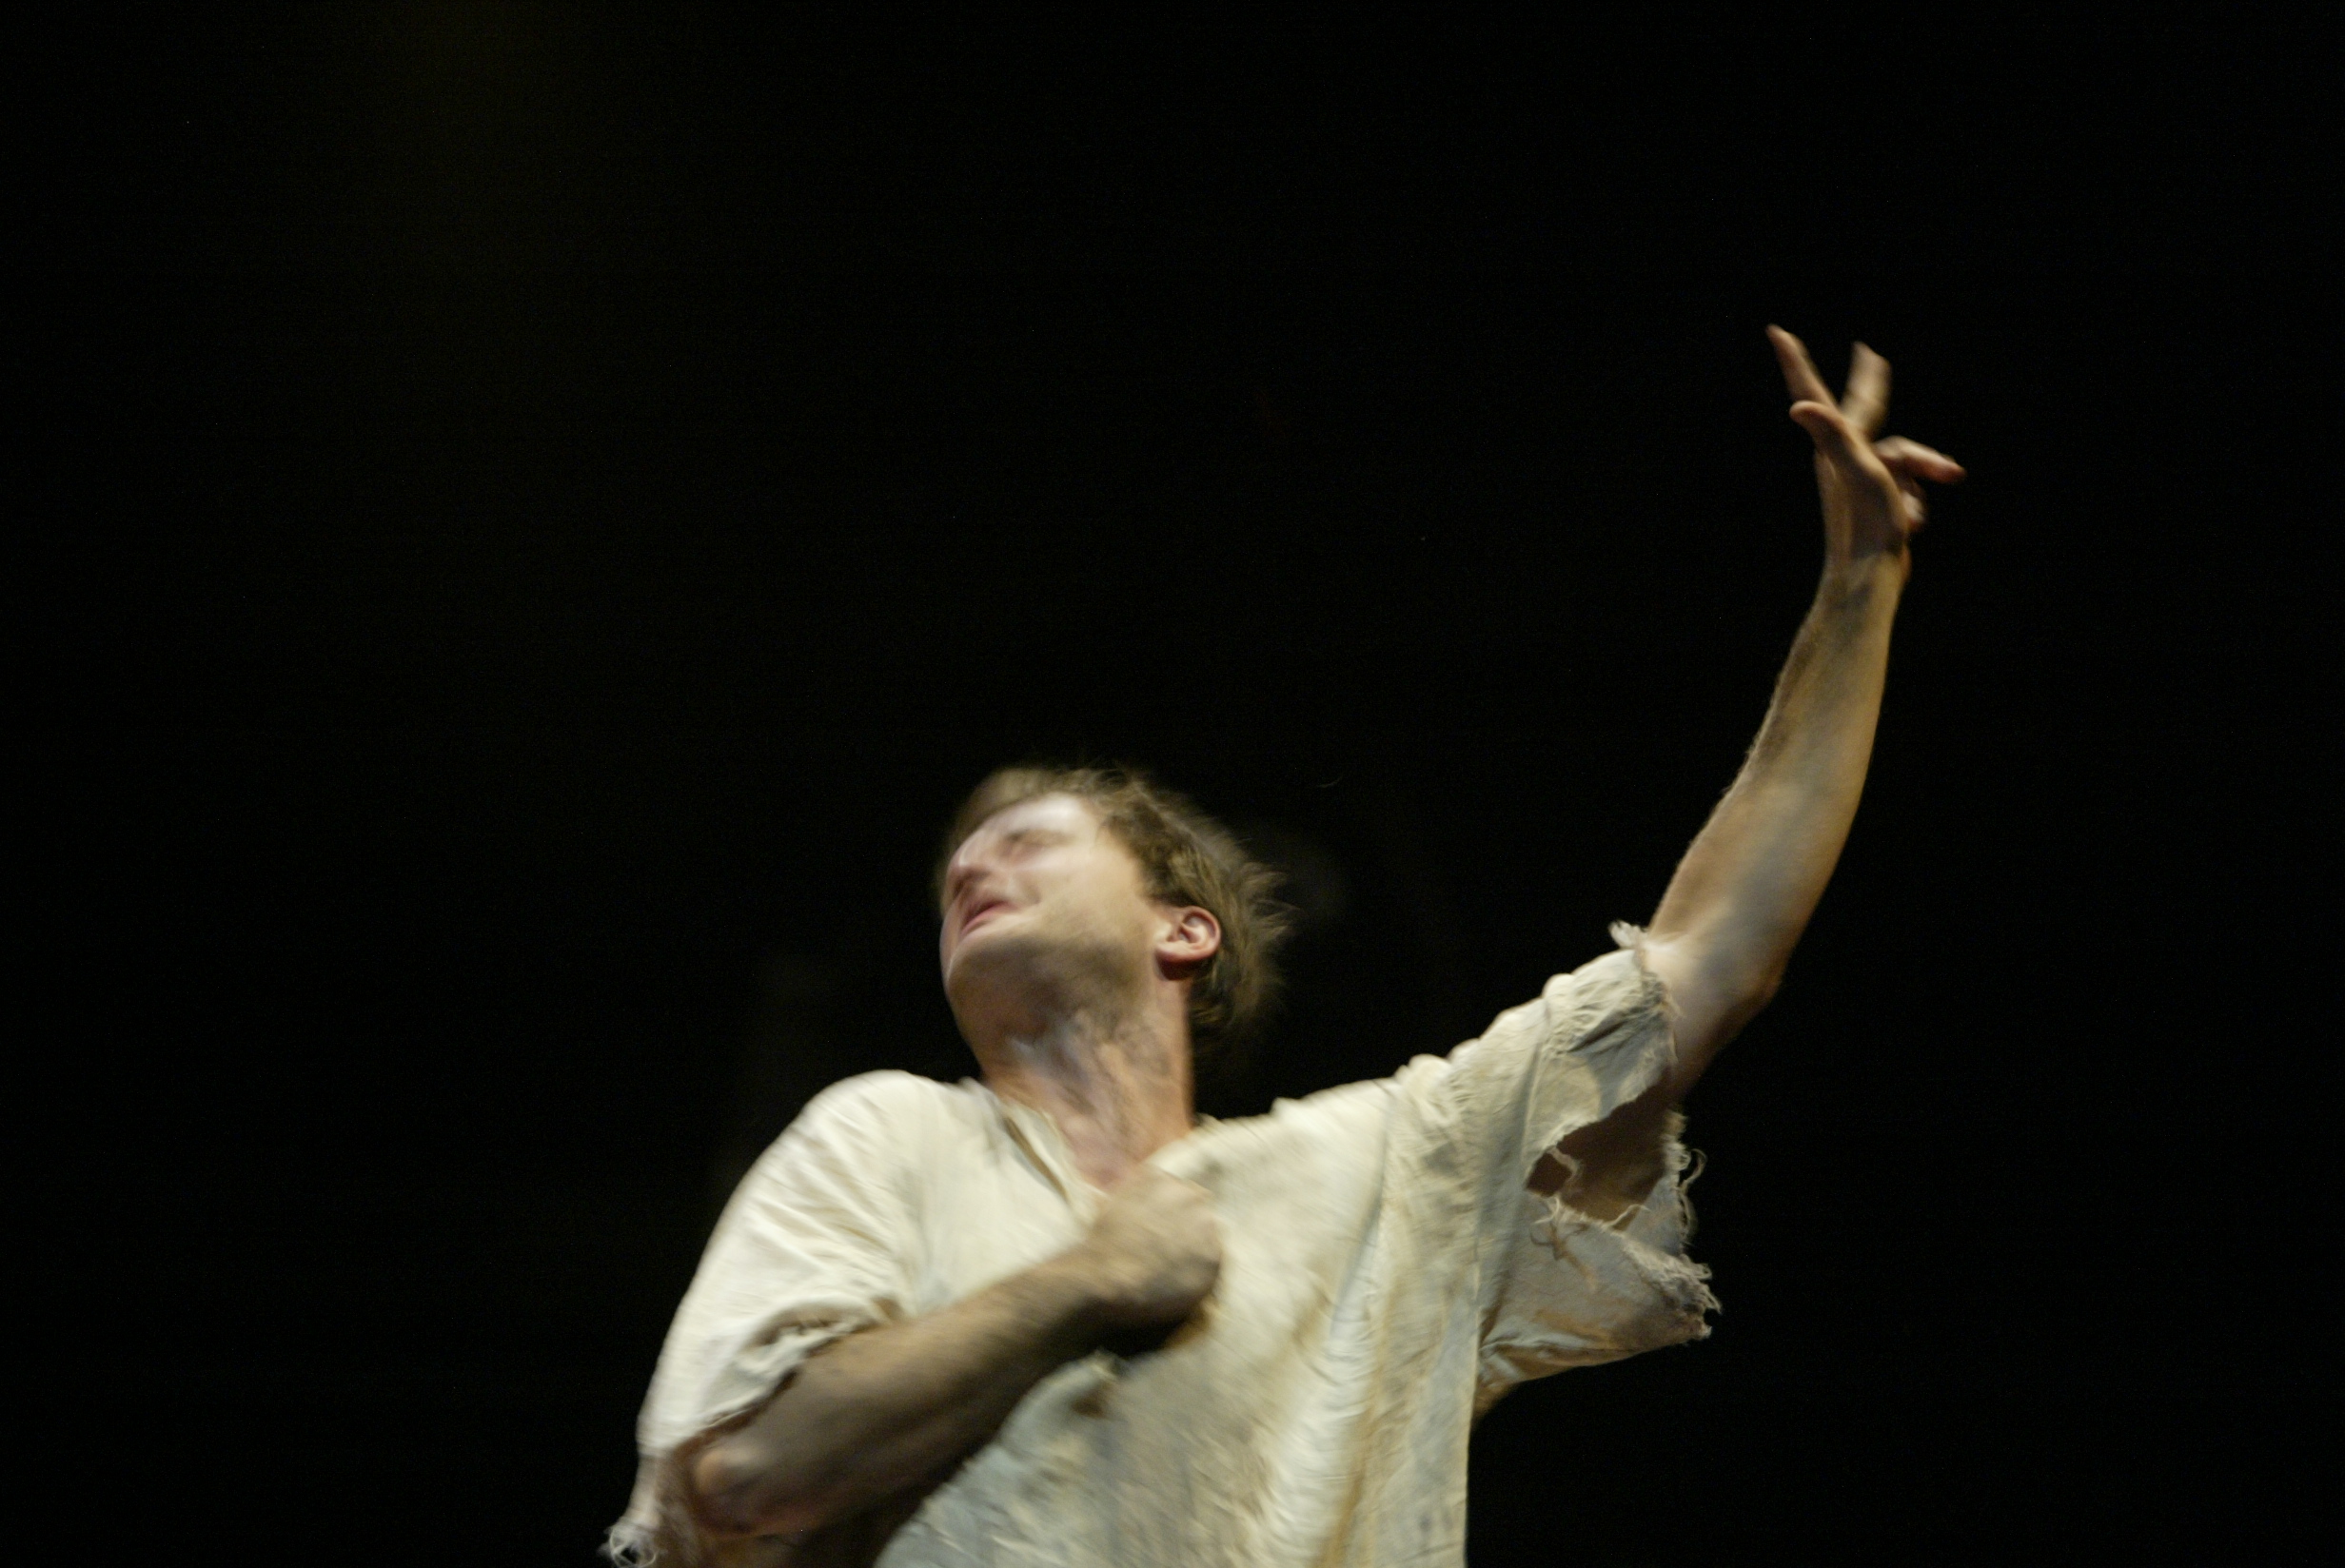 Chandler Williams as Clarence in the Prison Scene from Sam Mendes' Bridge production of Richard III.